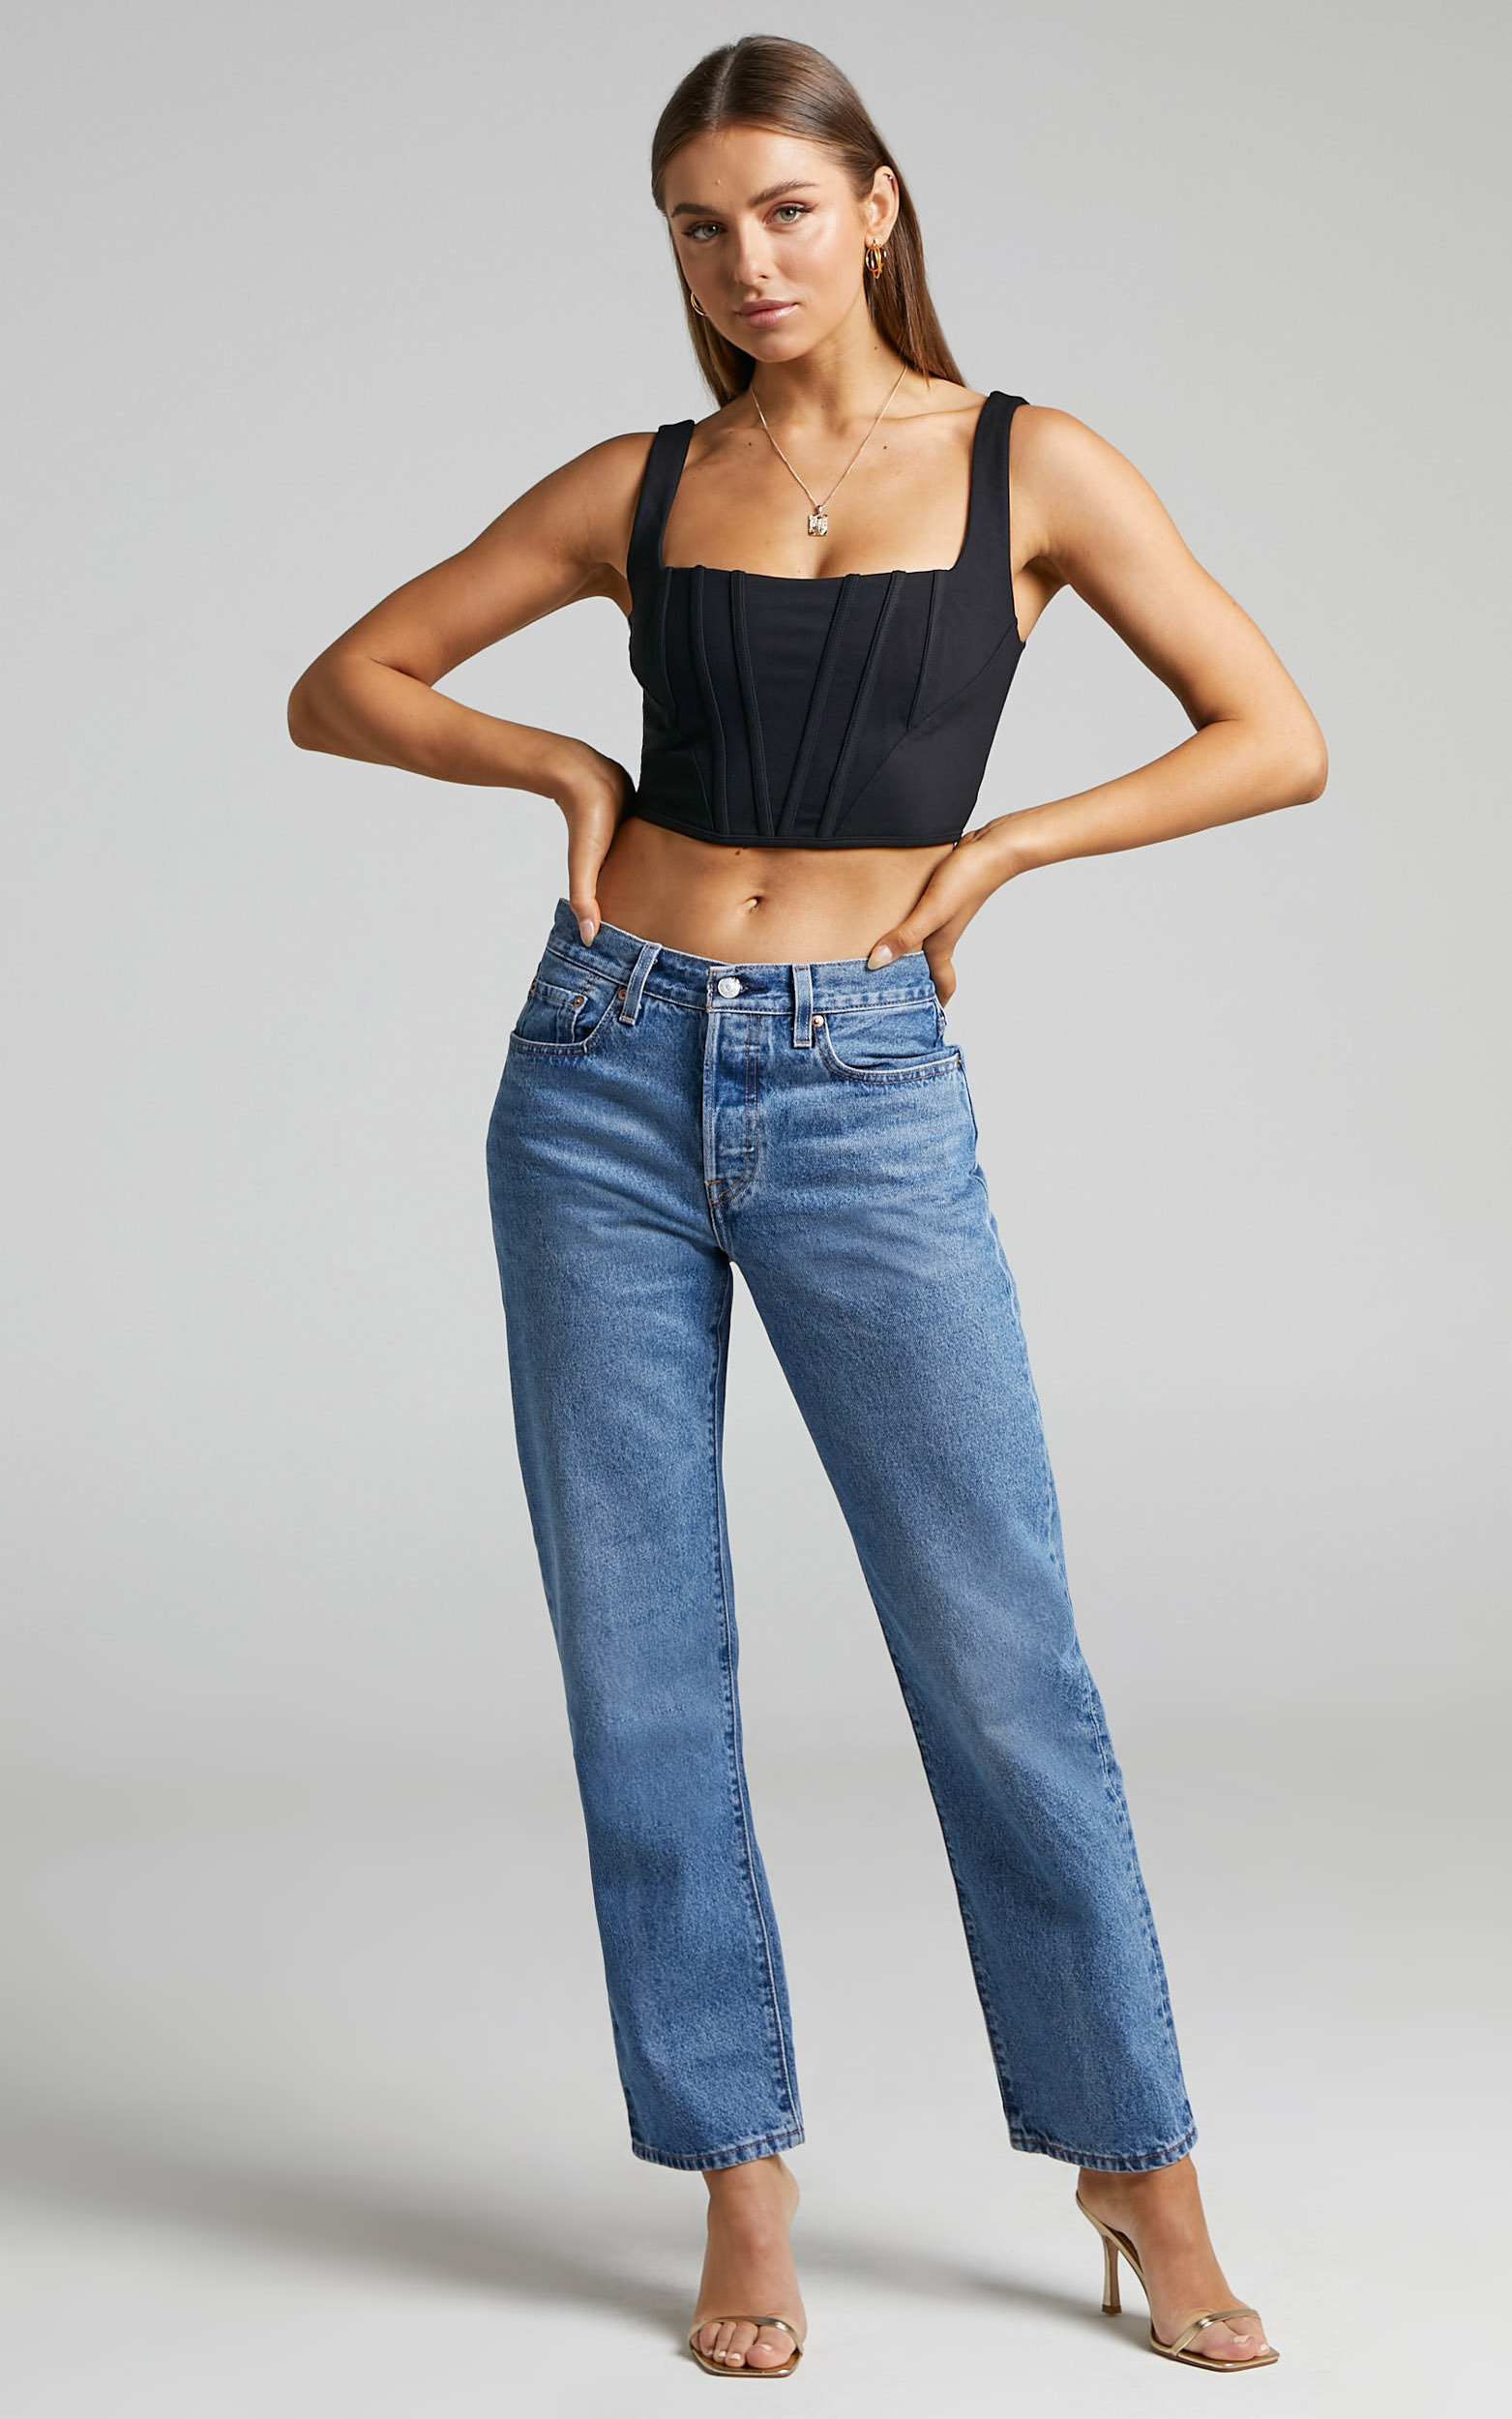 The Most Stylish Ethical Mom Jeans For 2023 - Eluxe Magazine